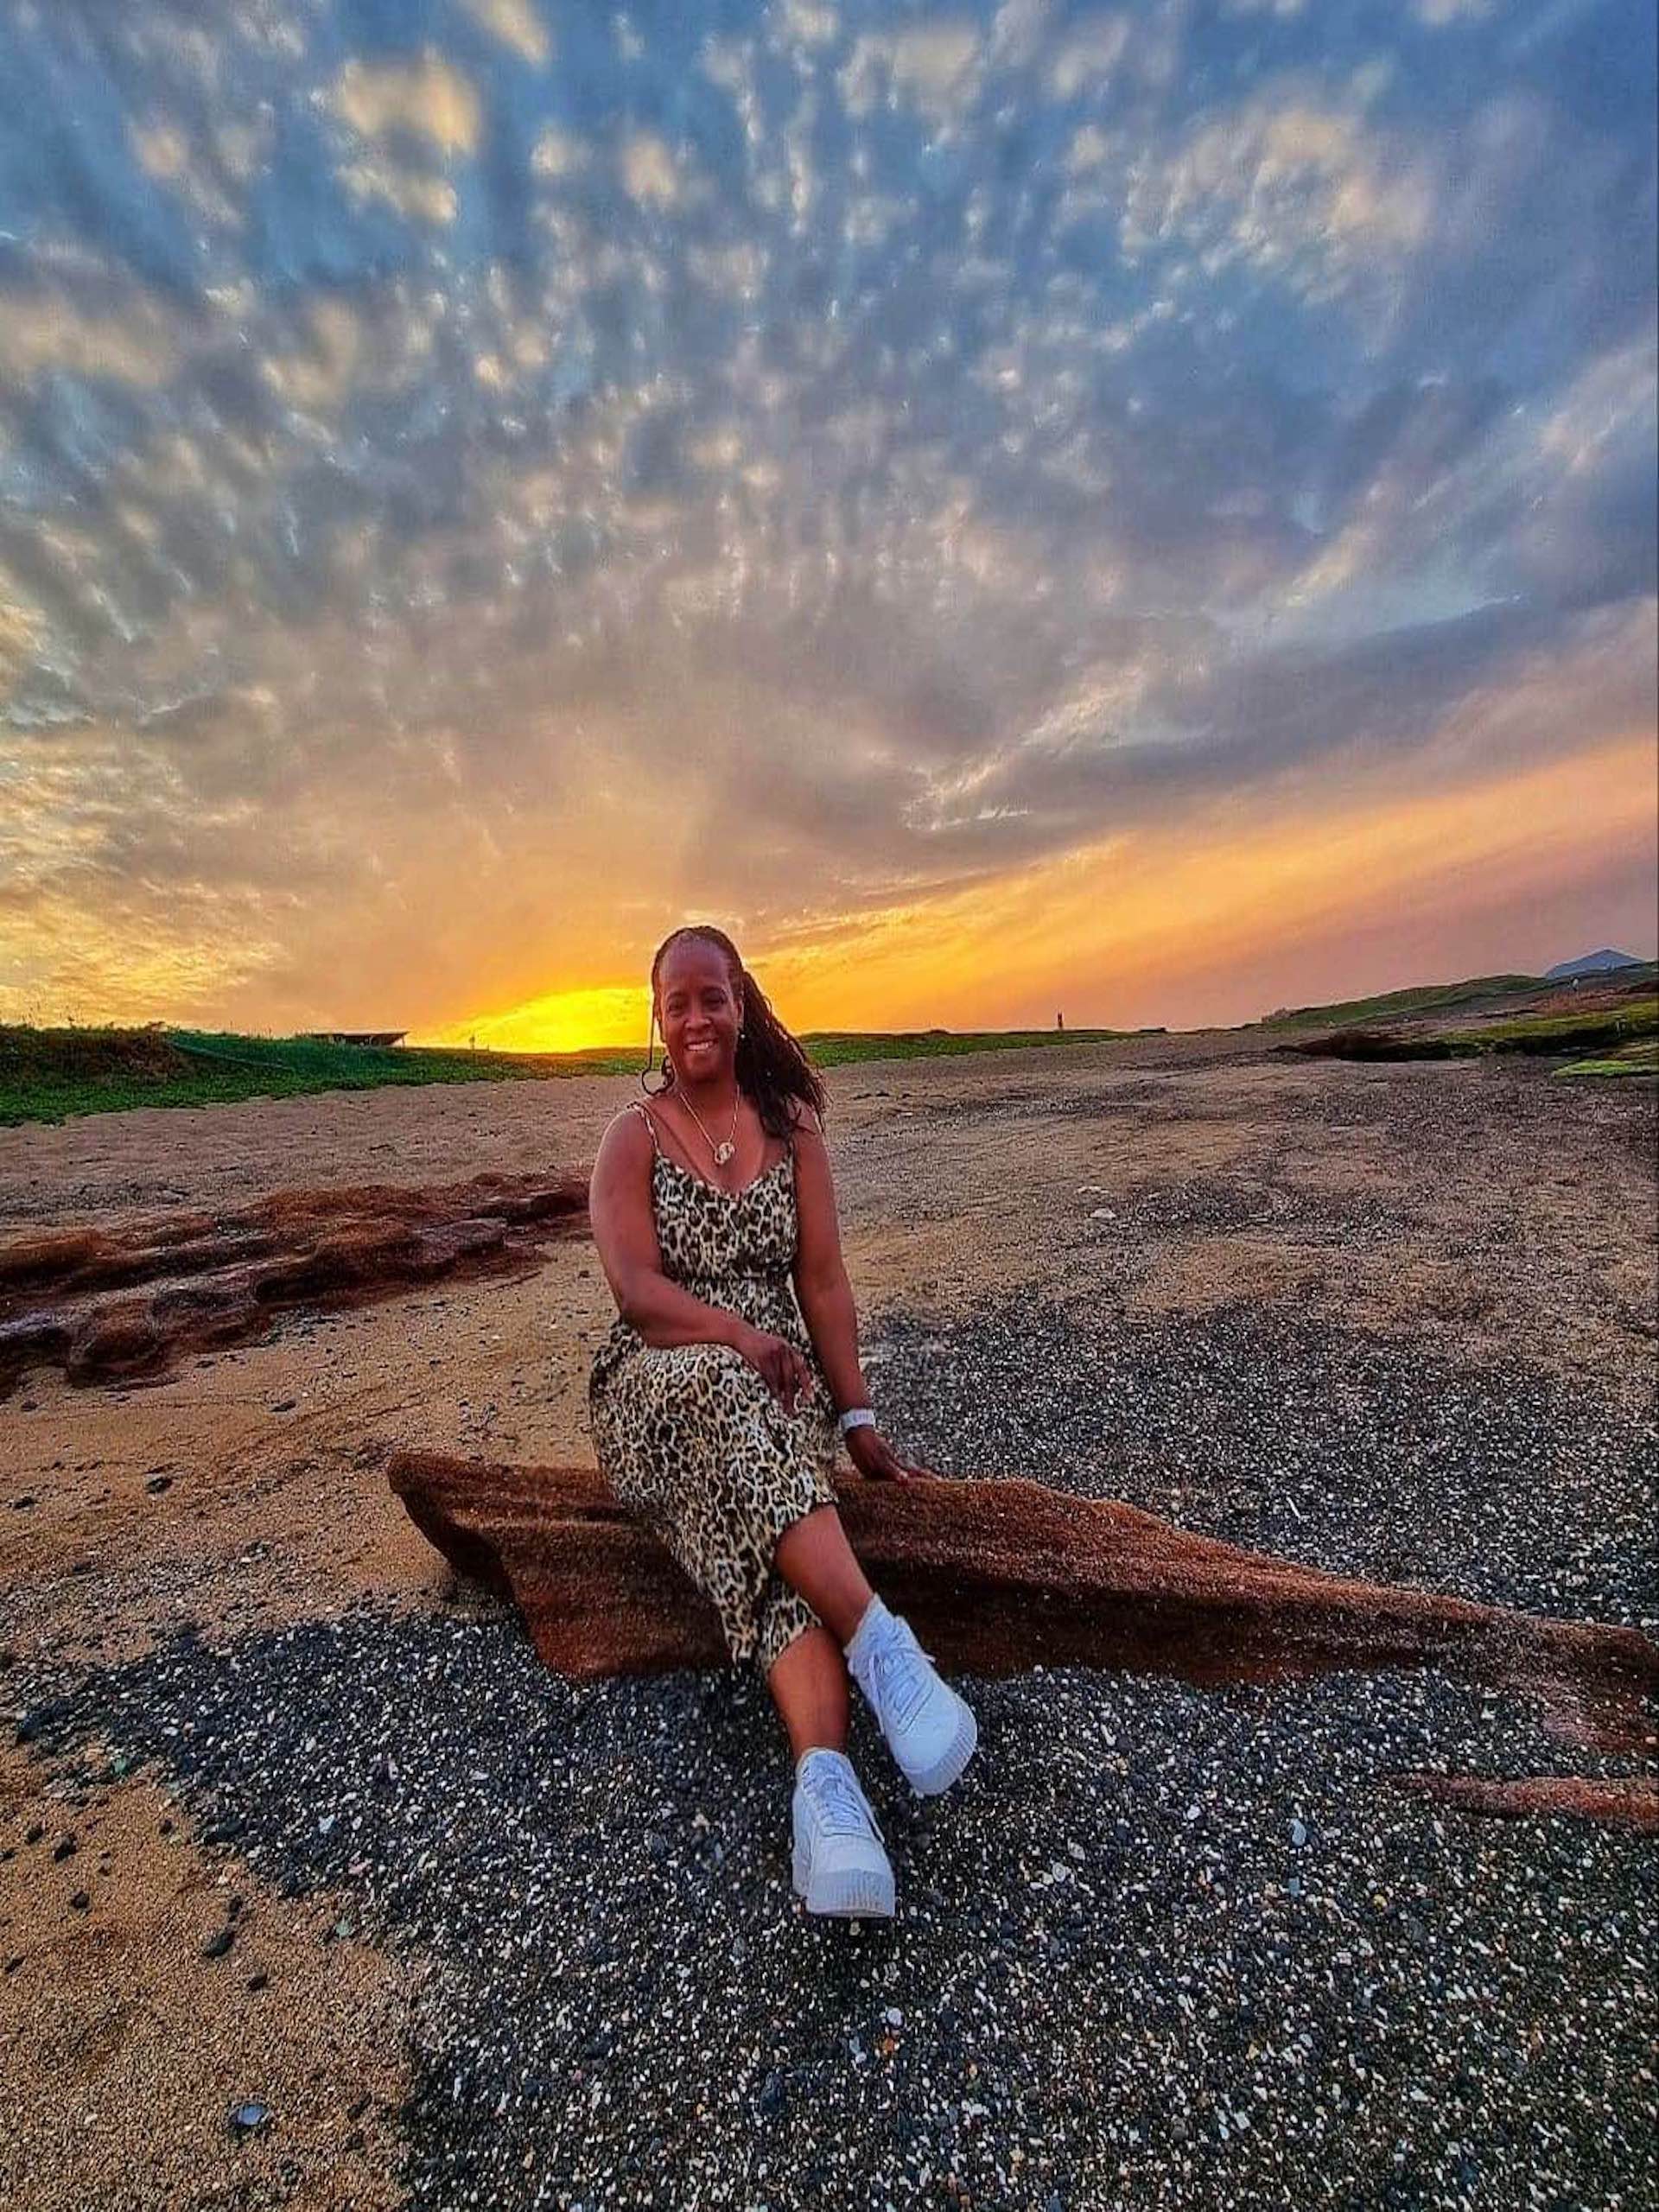 Stacey leopard sunset in Jeju- featured image